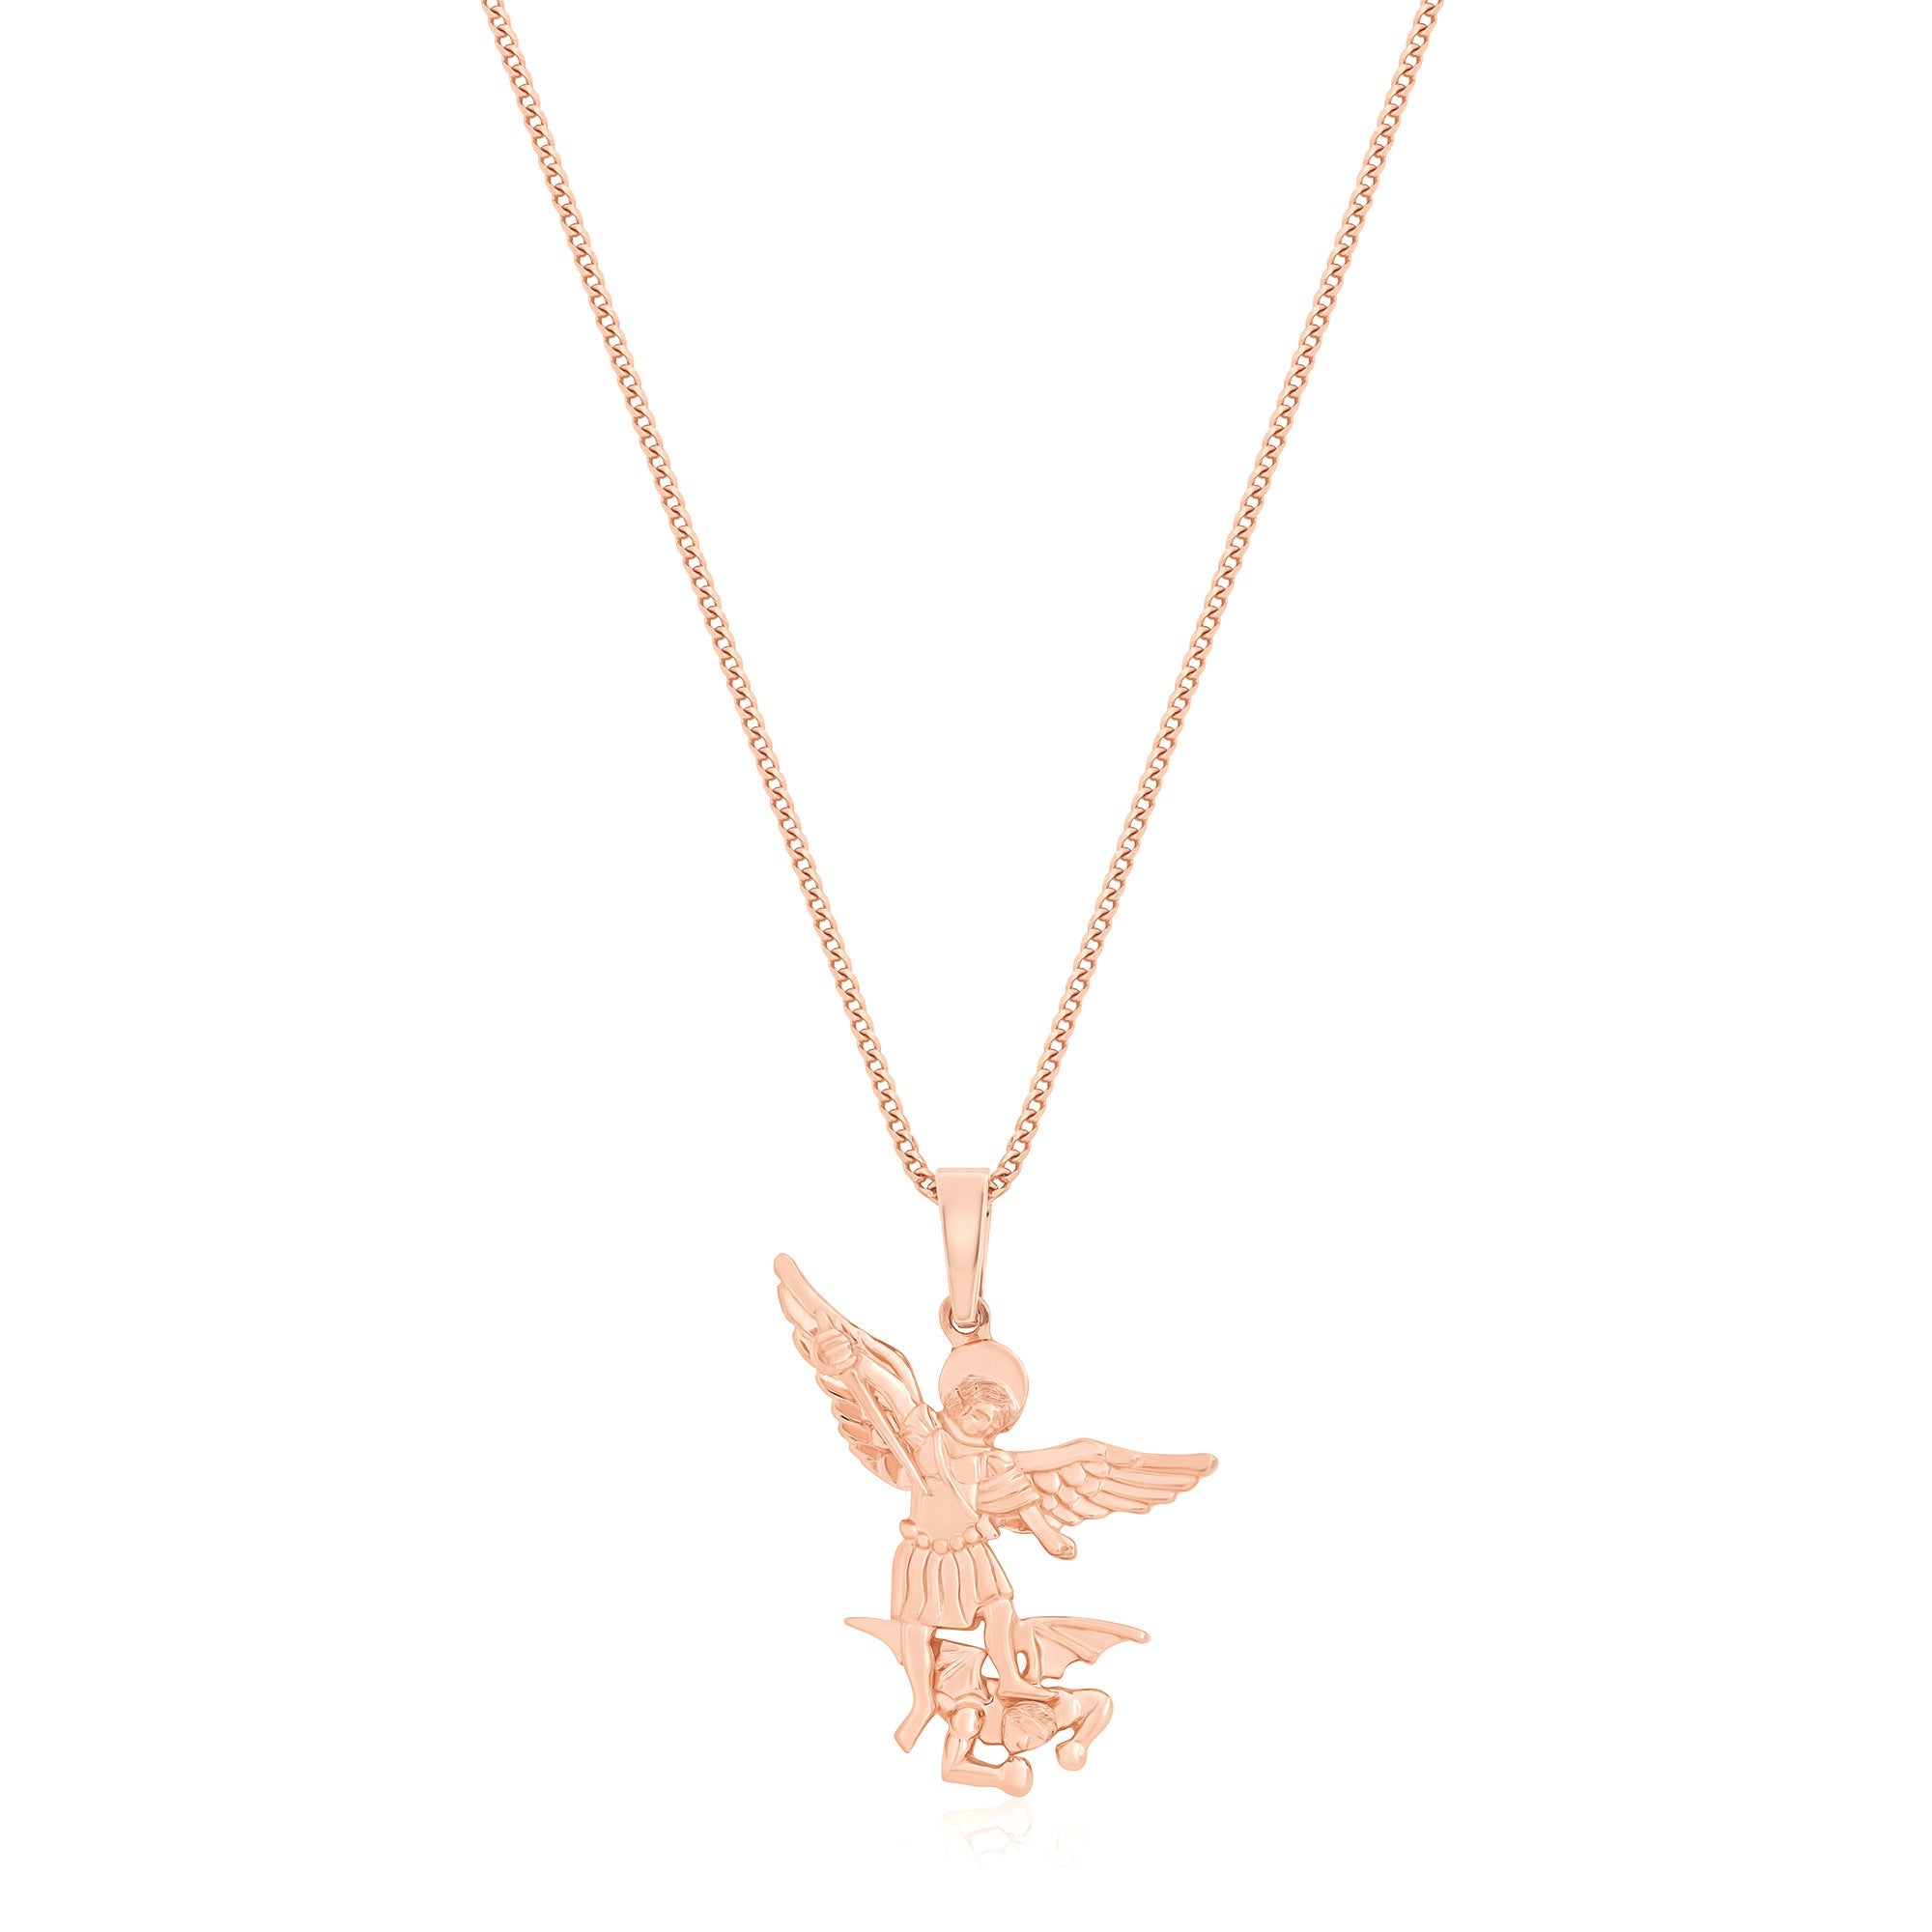 Micro Saint Michael Arch Angel Piece (Solid Gold) (14K ROSE GOLD) - IF & Co. Custom Jewelers